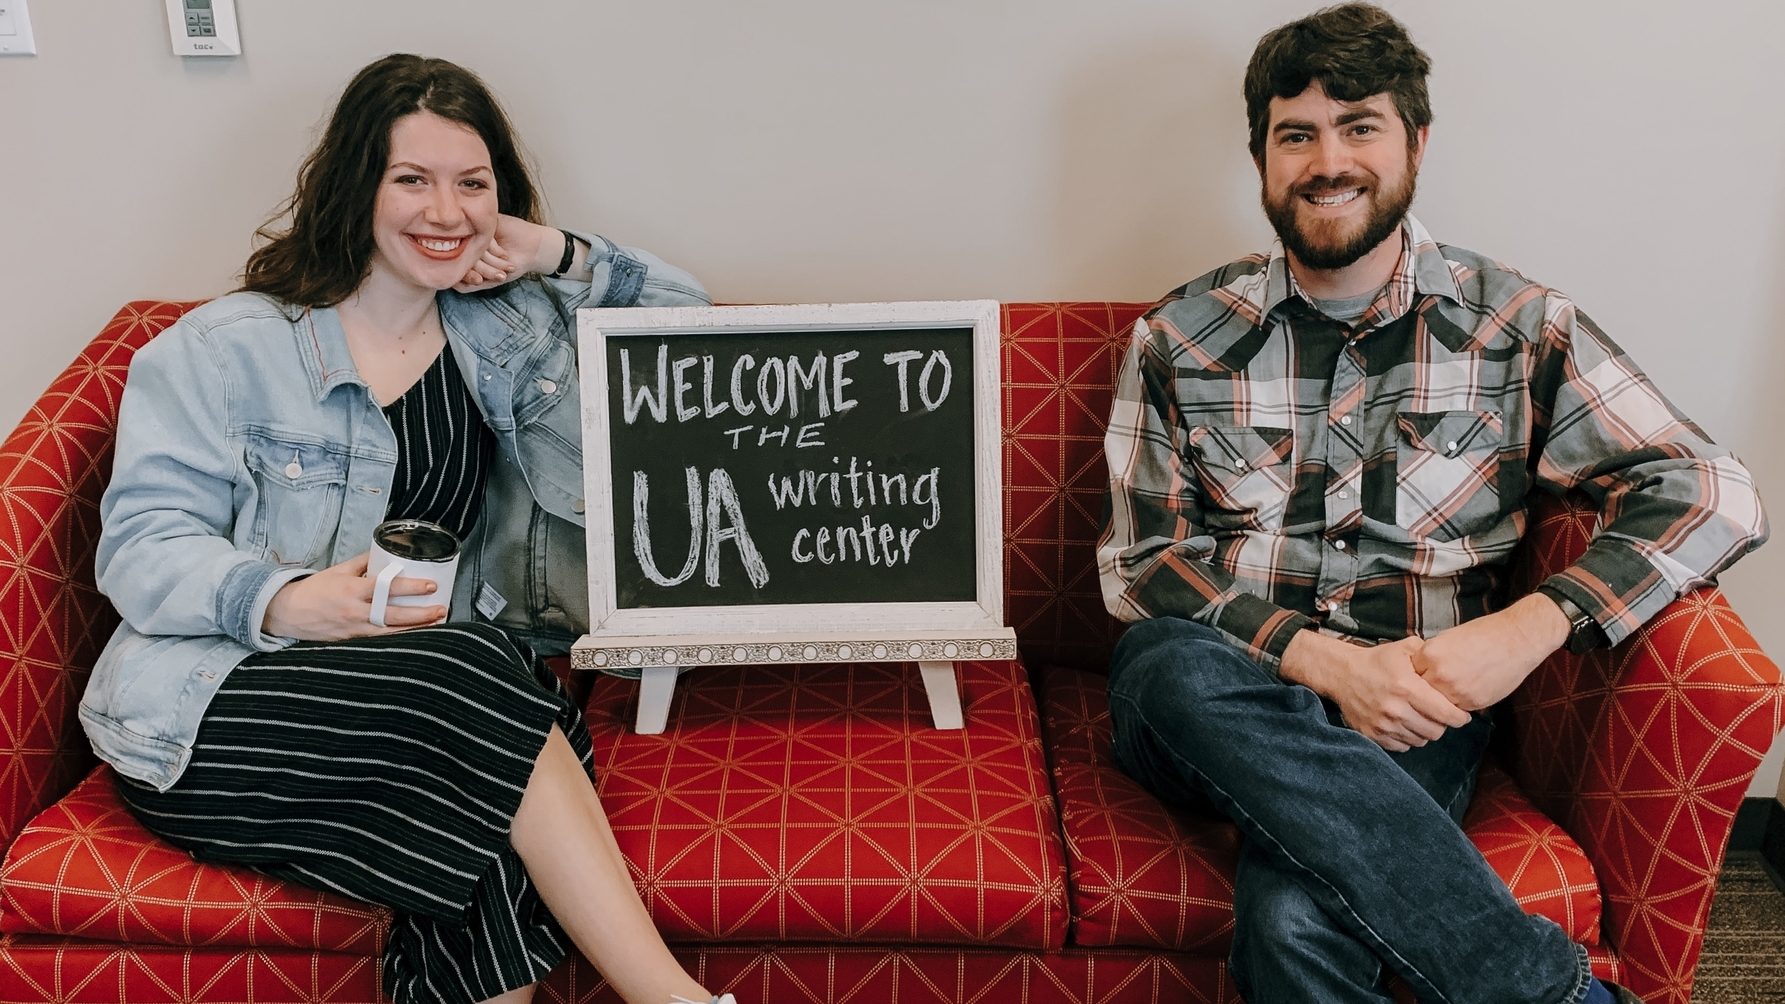 UA Writing Center posed photo on couch